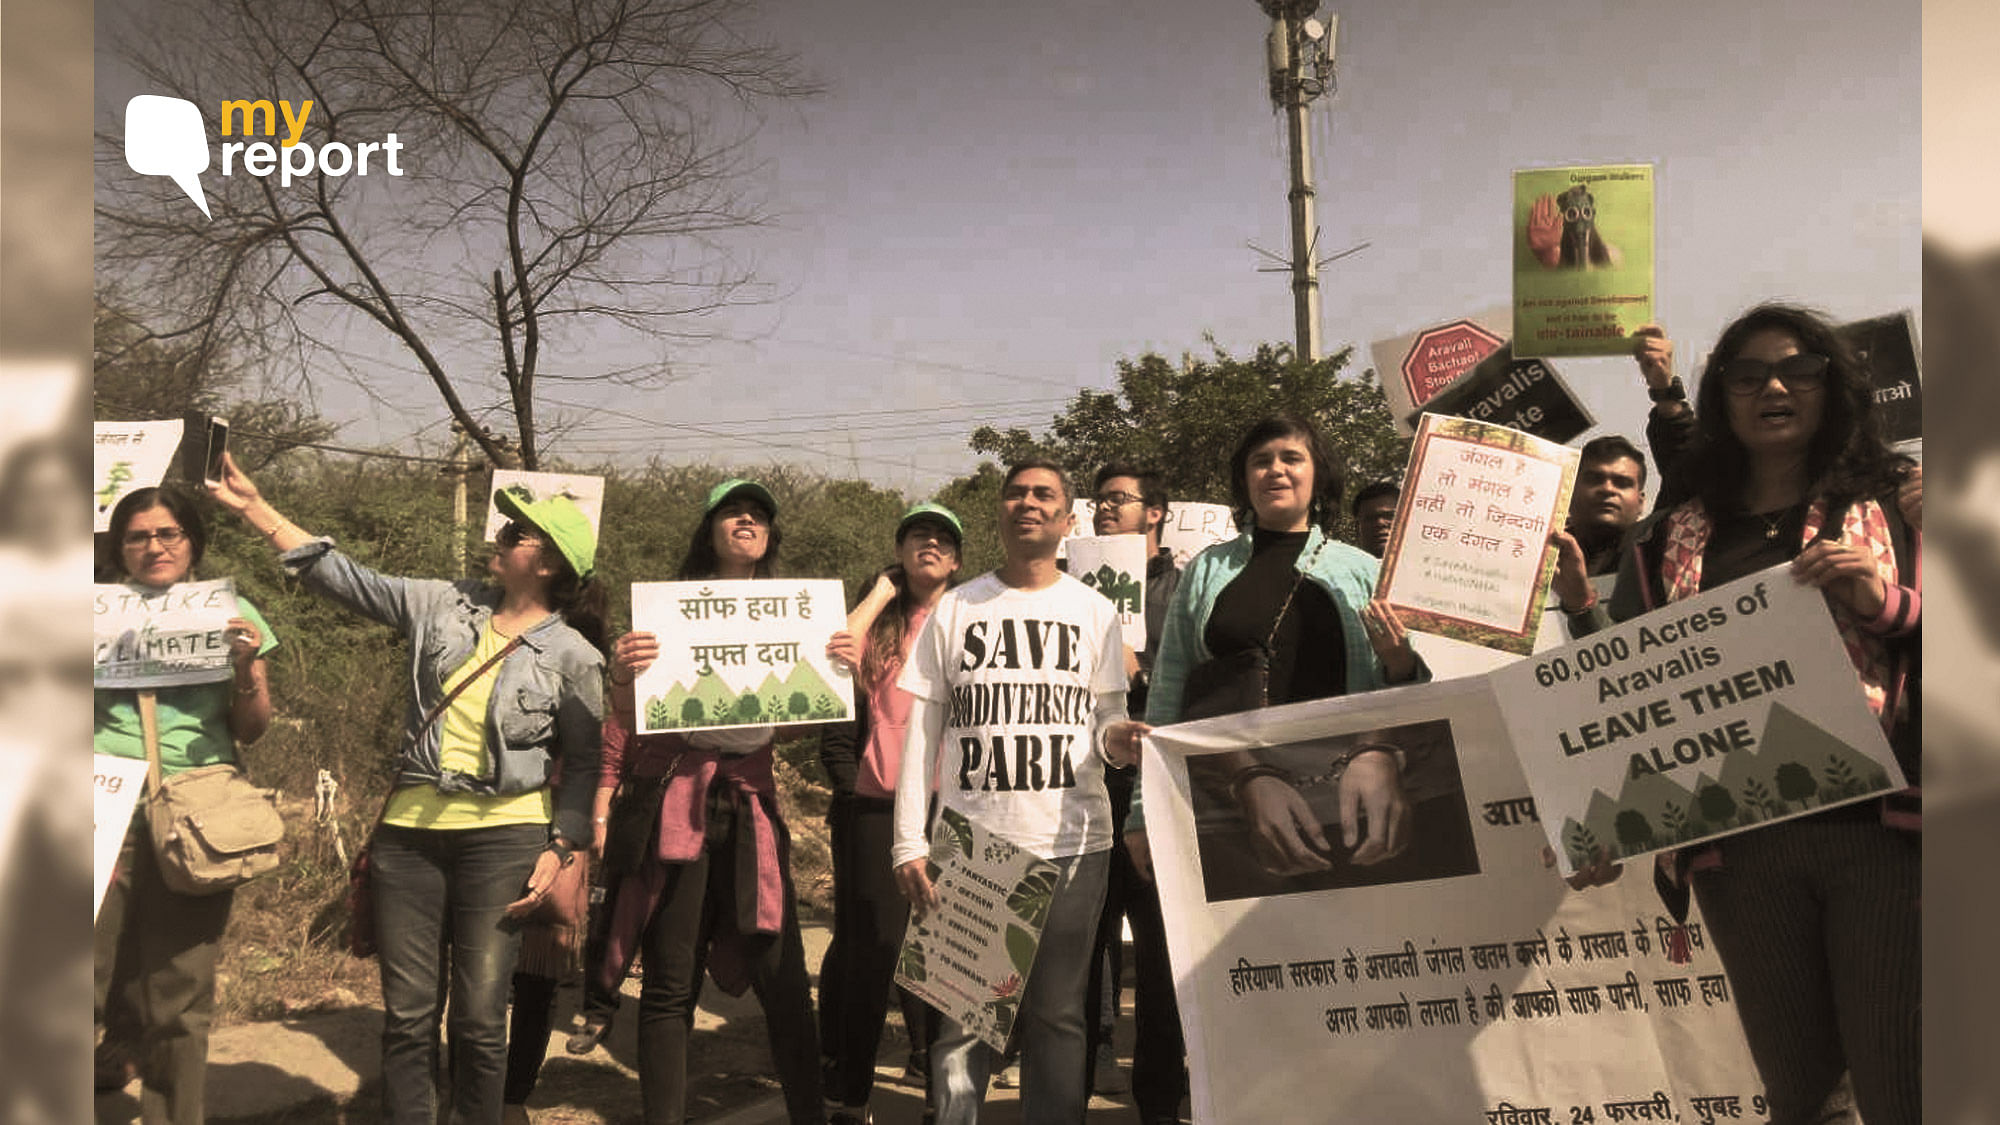 Citizens protest to save Aravalli forest cover in Gurugram.